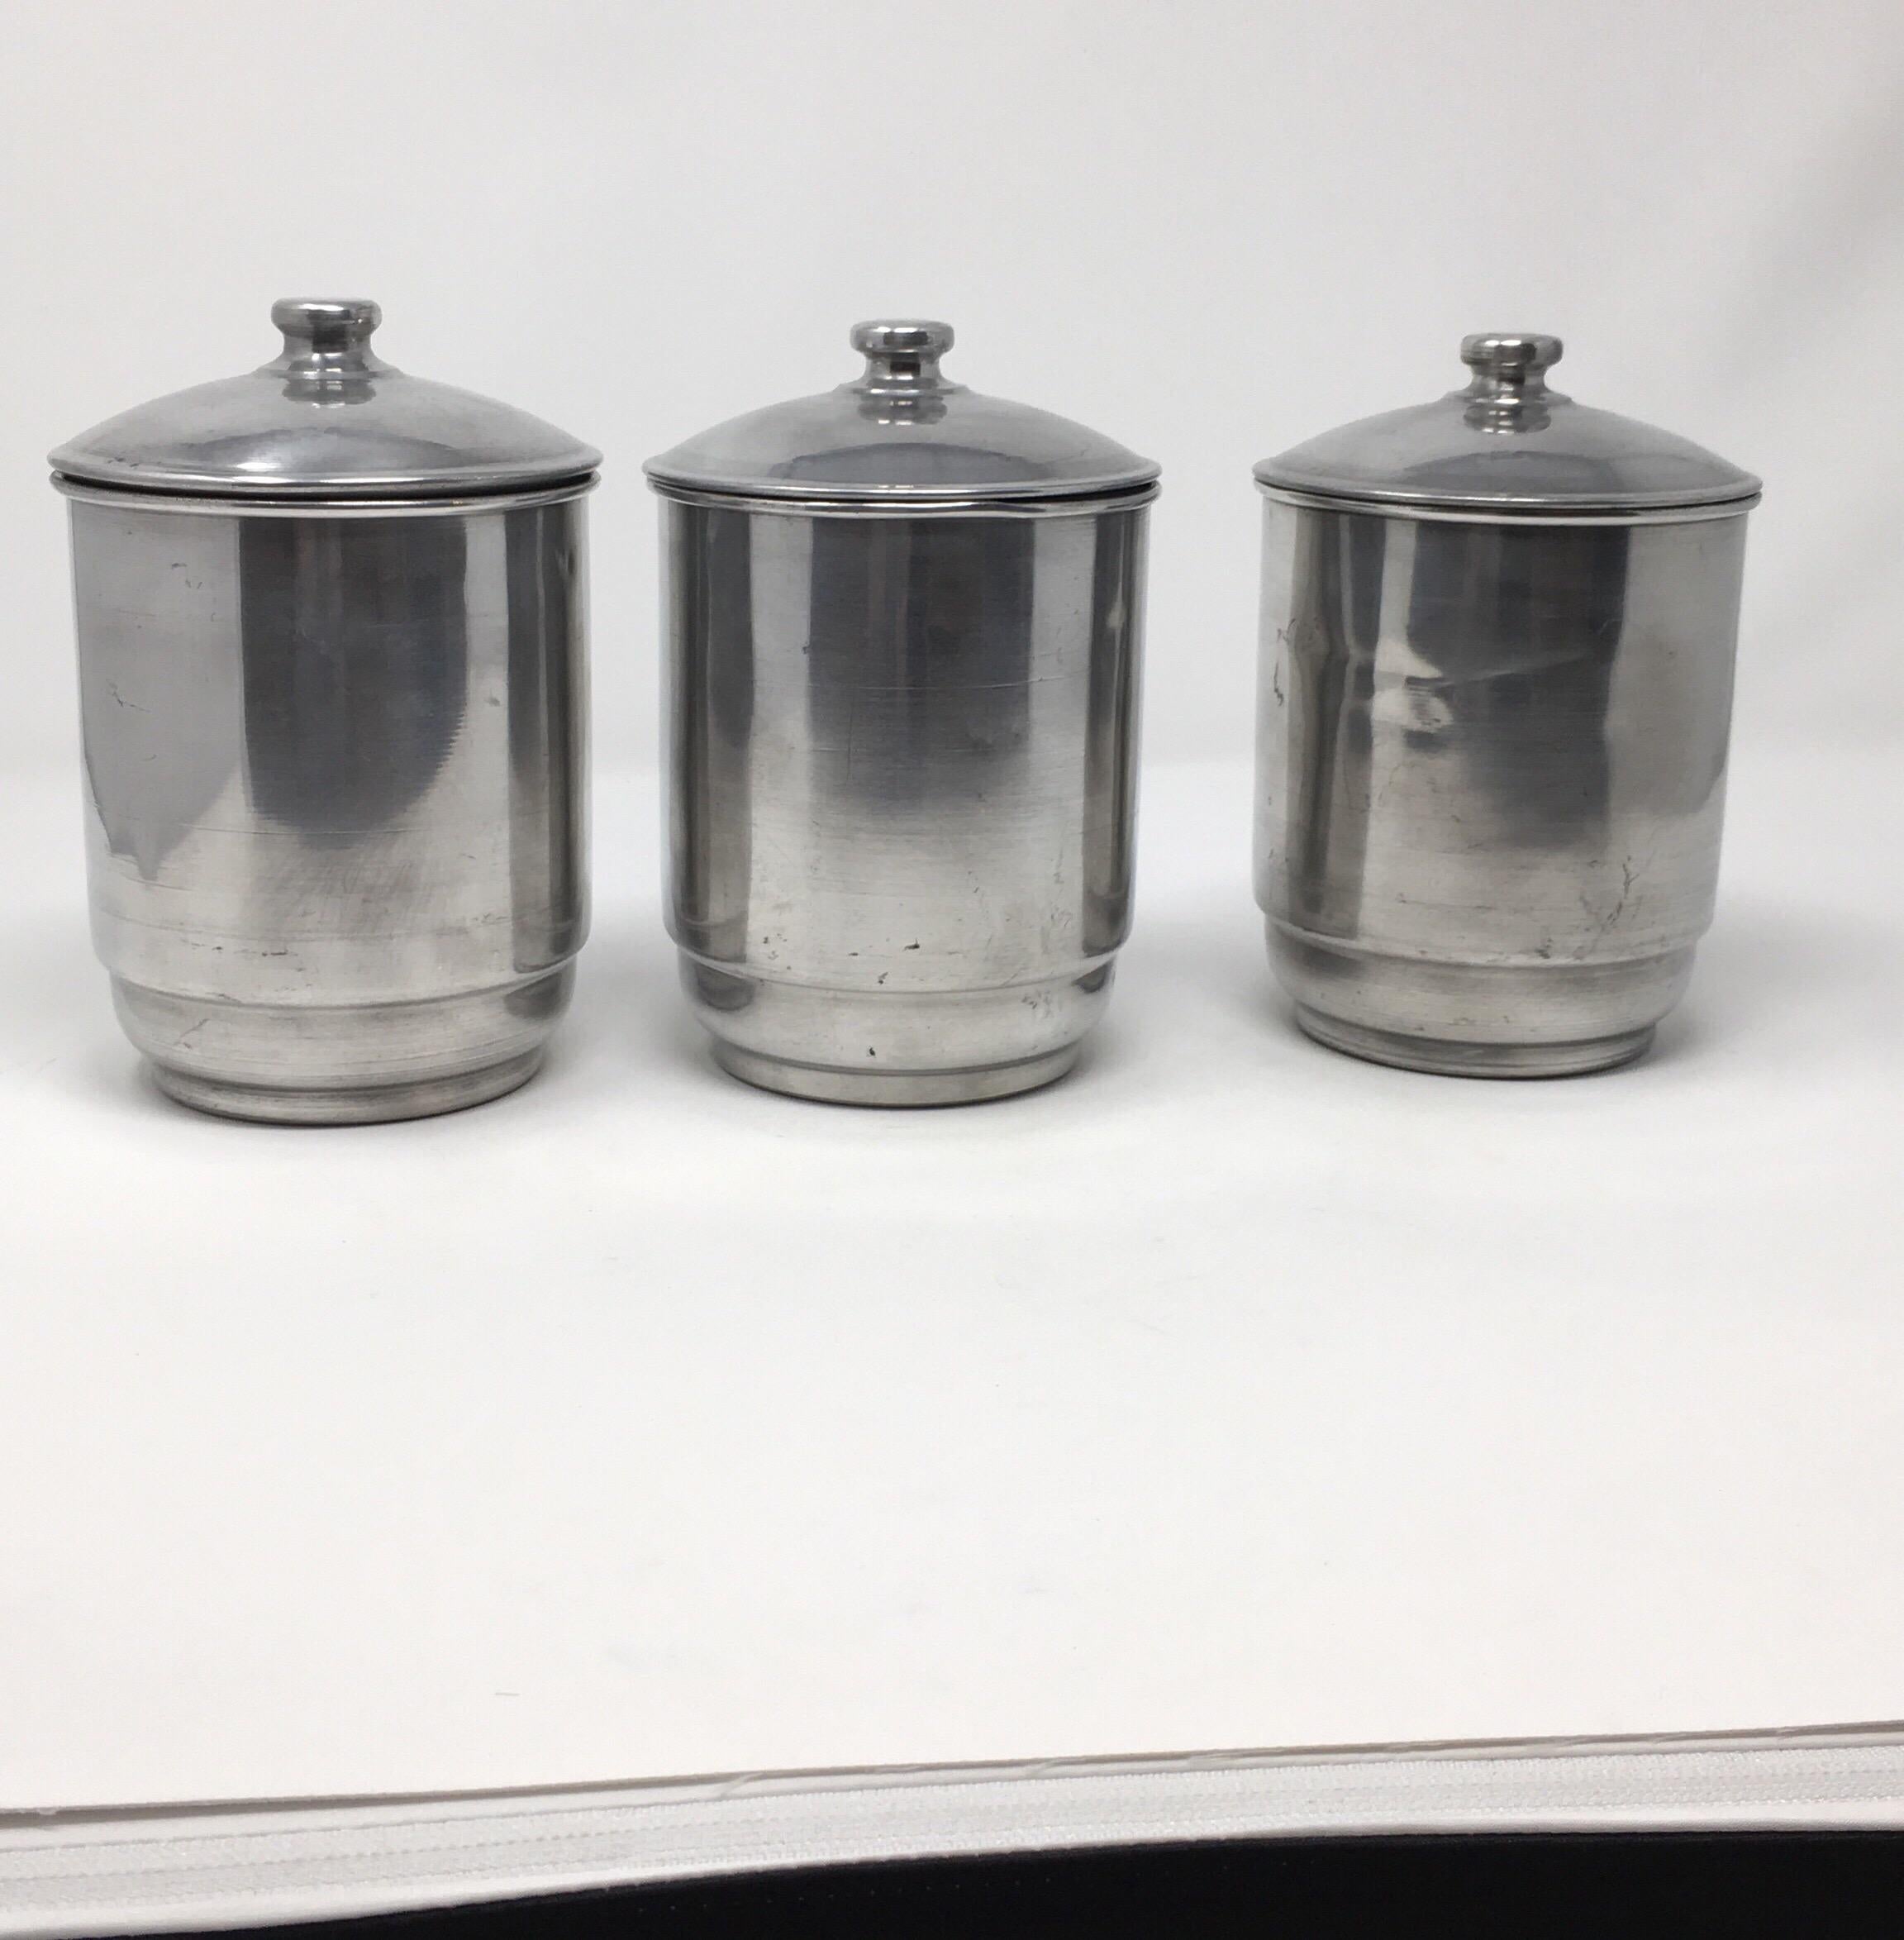 This French tin canister set consists of three equal size lidded canisters. The canisters are tin with brown plaques and silver lettering, Cafe- coffee, Sucre - sugar and Chicoree - chicory. This lovely set will surely add French charm to your